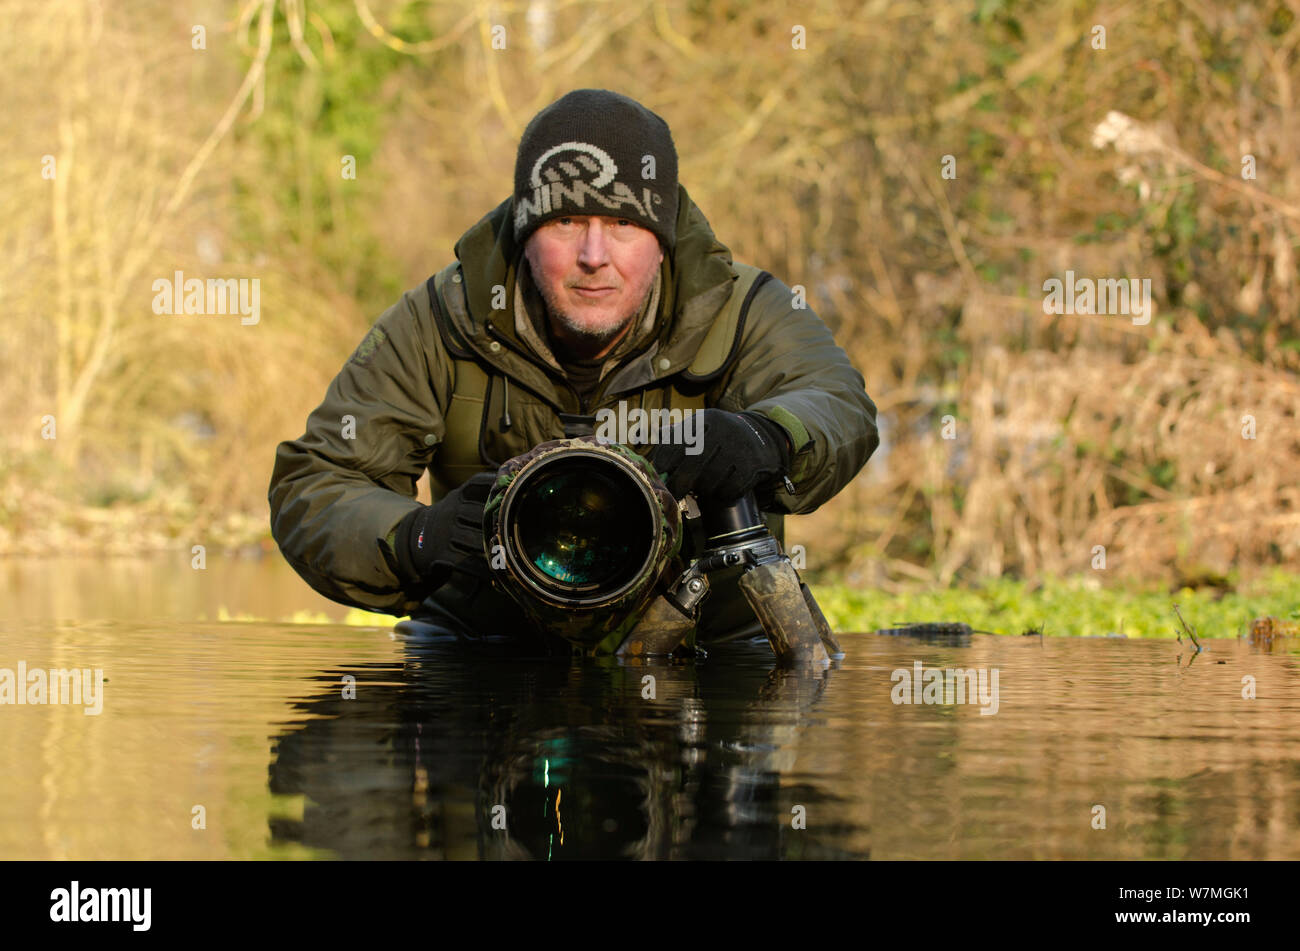 Photographer Terry Whittaker photographing Water voles (Arvicola terrestris) whilst on assignment for 2020VISION, Kent, England, UK, February 2012. 2020VISION Exhibition. Stock Photo